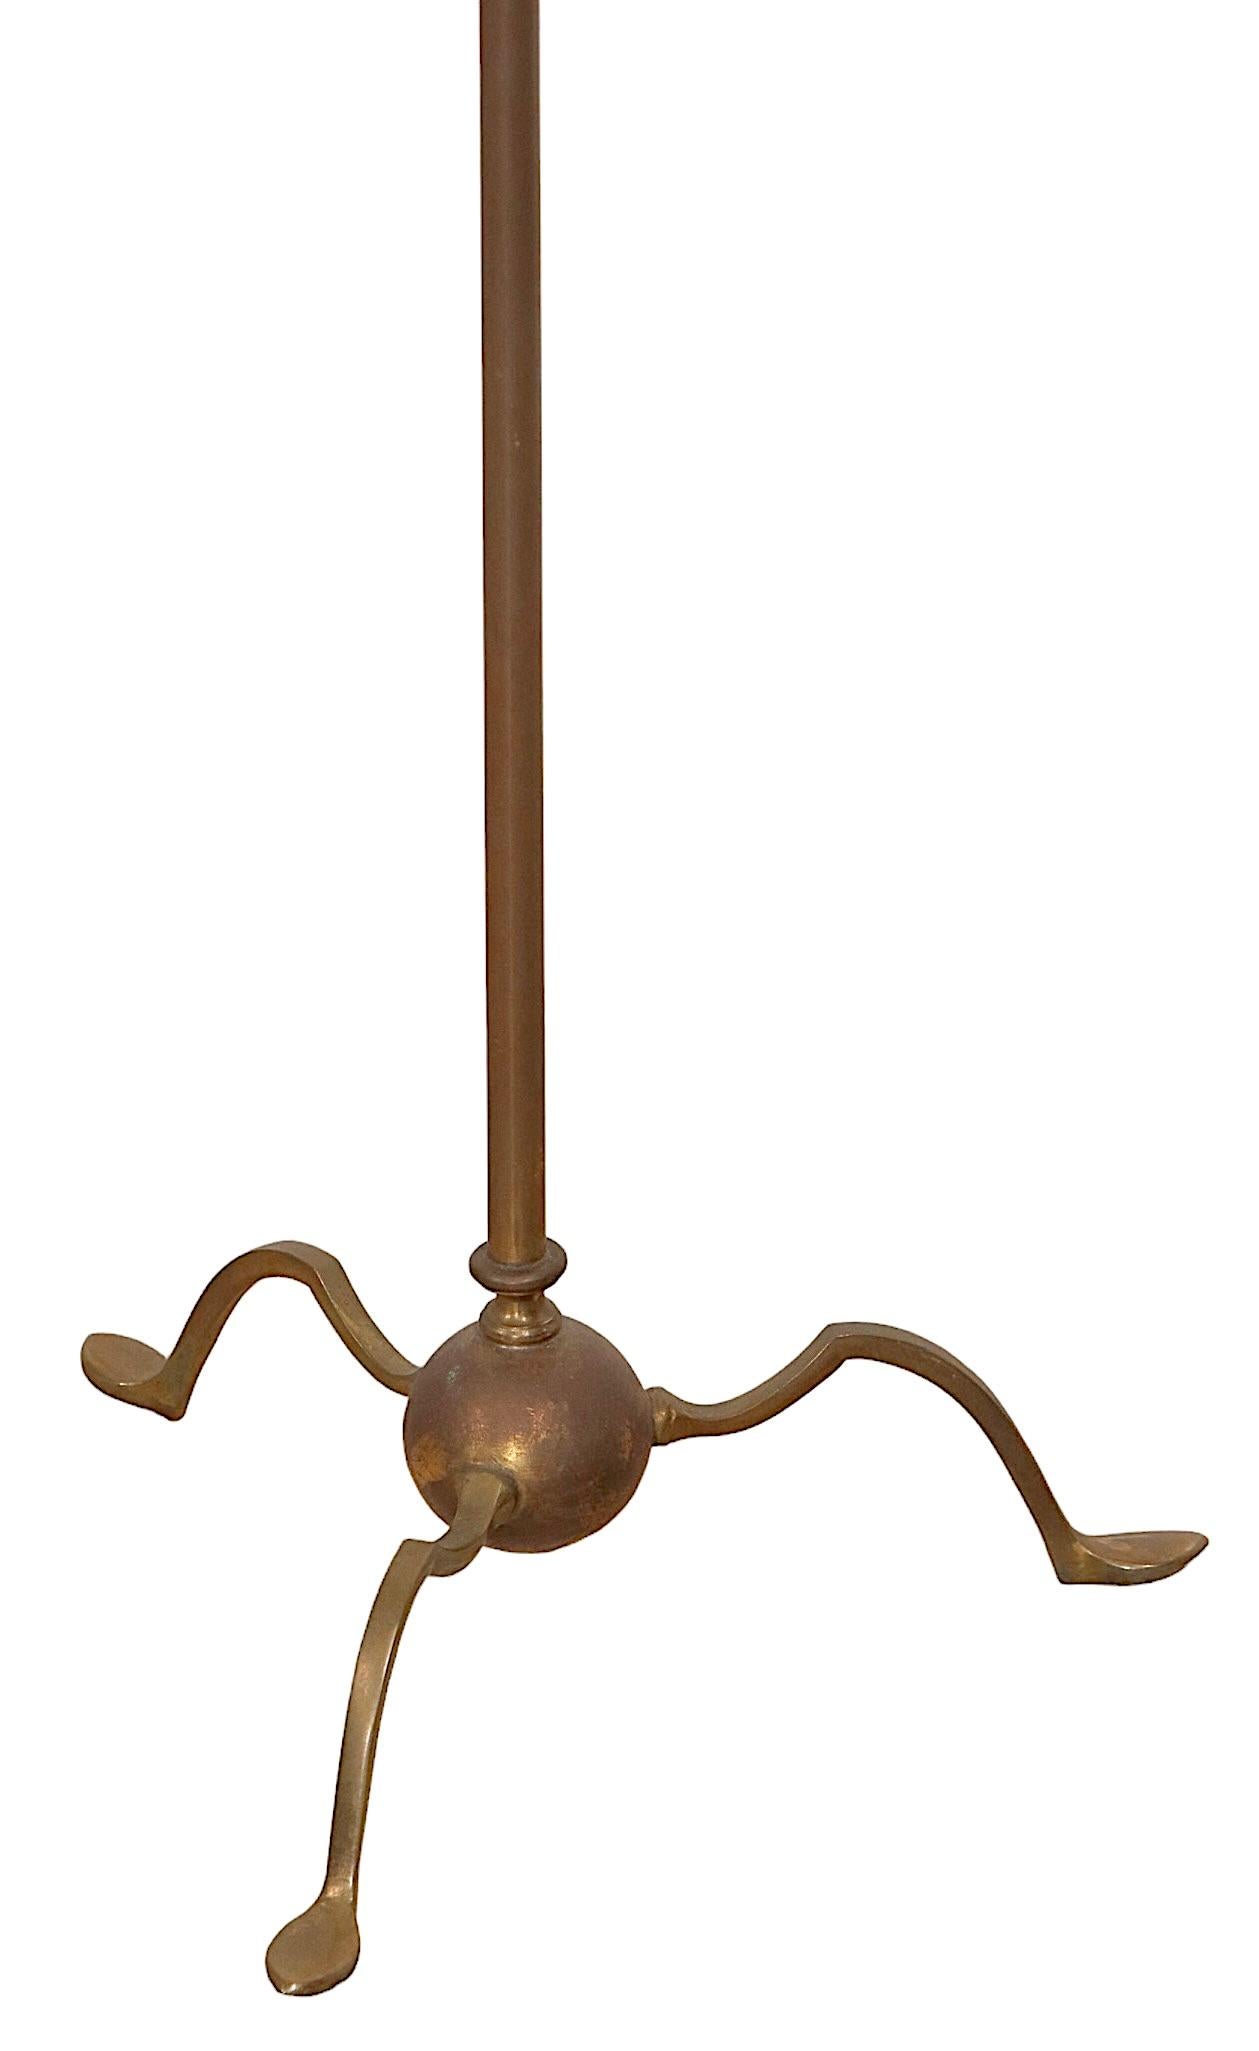 American Articulating Brass Reading Floor Lamp in the Classical Style, C. 1900- 1930's For Sale